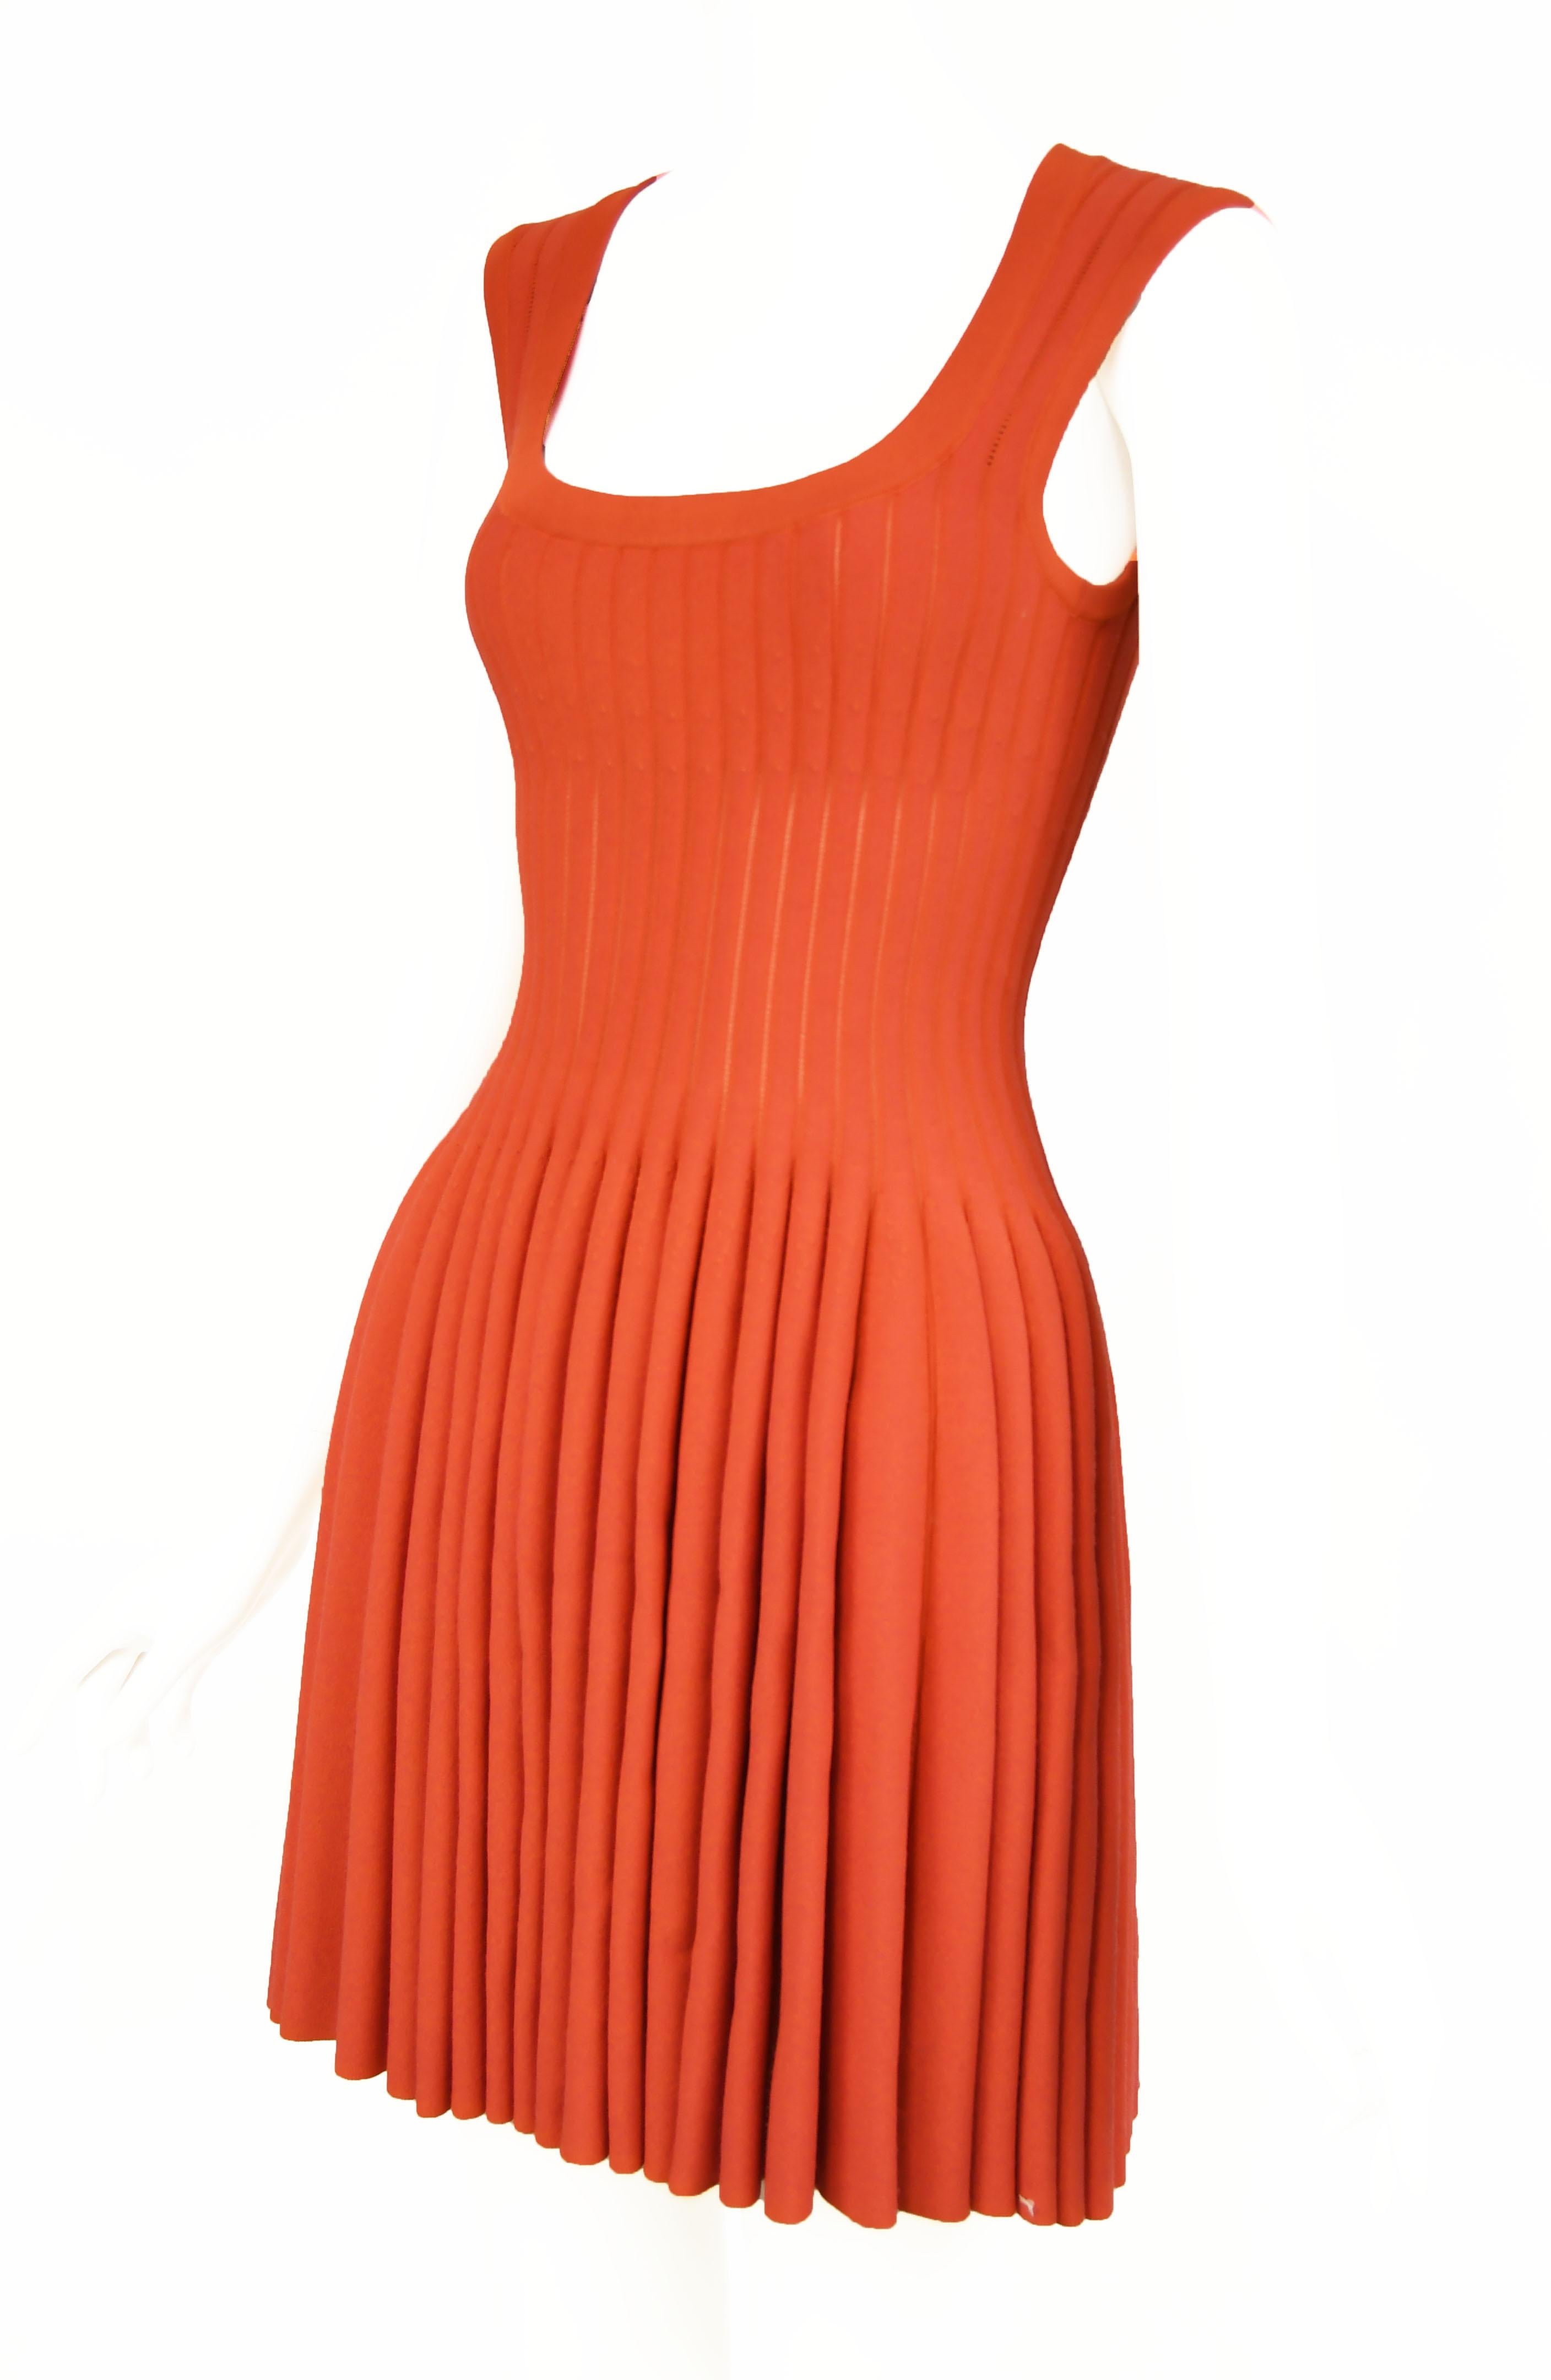 Gorgeous dark coral Alaia fit and flare dress.  Slightly sheer knit between the ribs (see last photo) gives this dress interesting detail and texture.  Beautiful square neckline, classic Alaia dress in stunning color.

Size: FR 38

Condition: